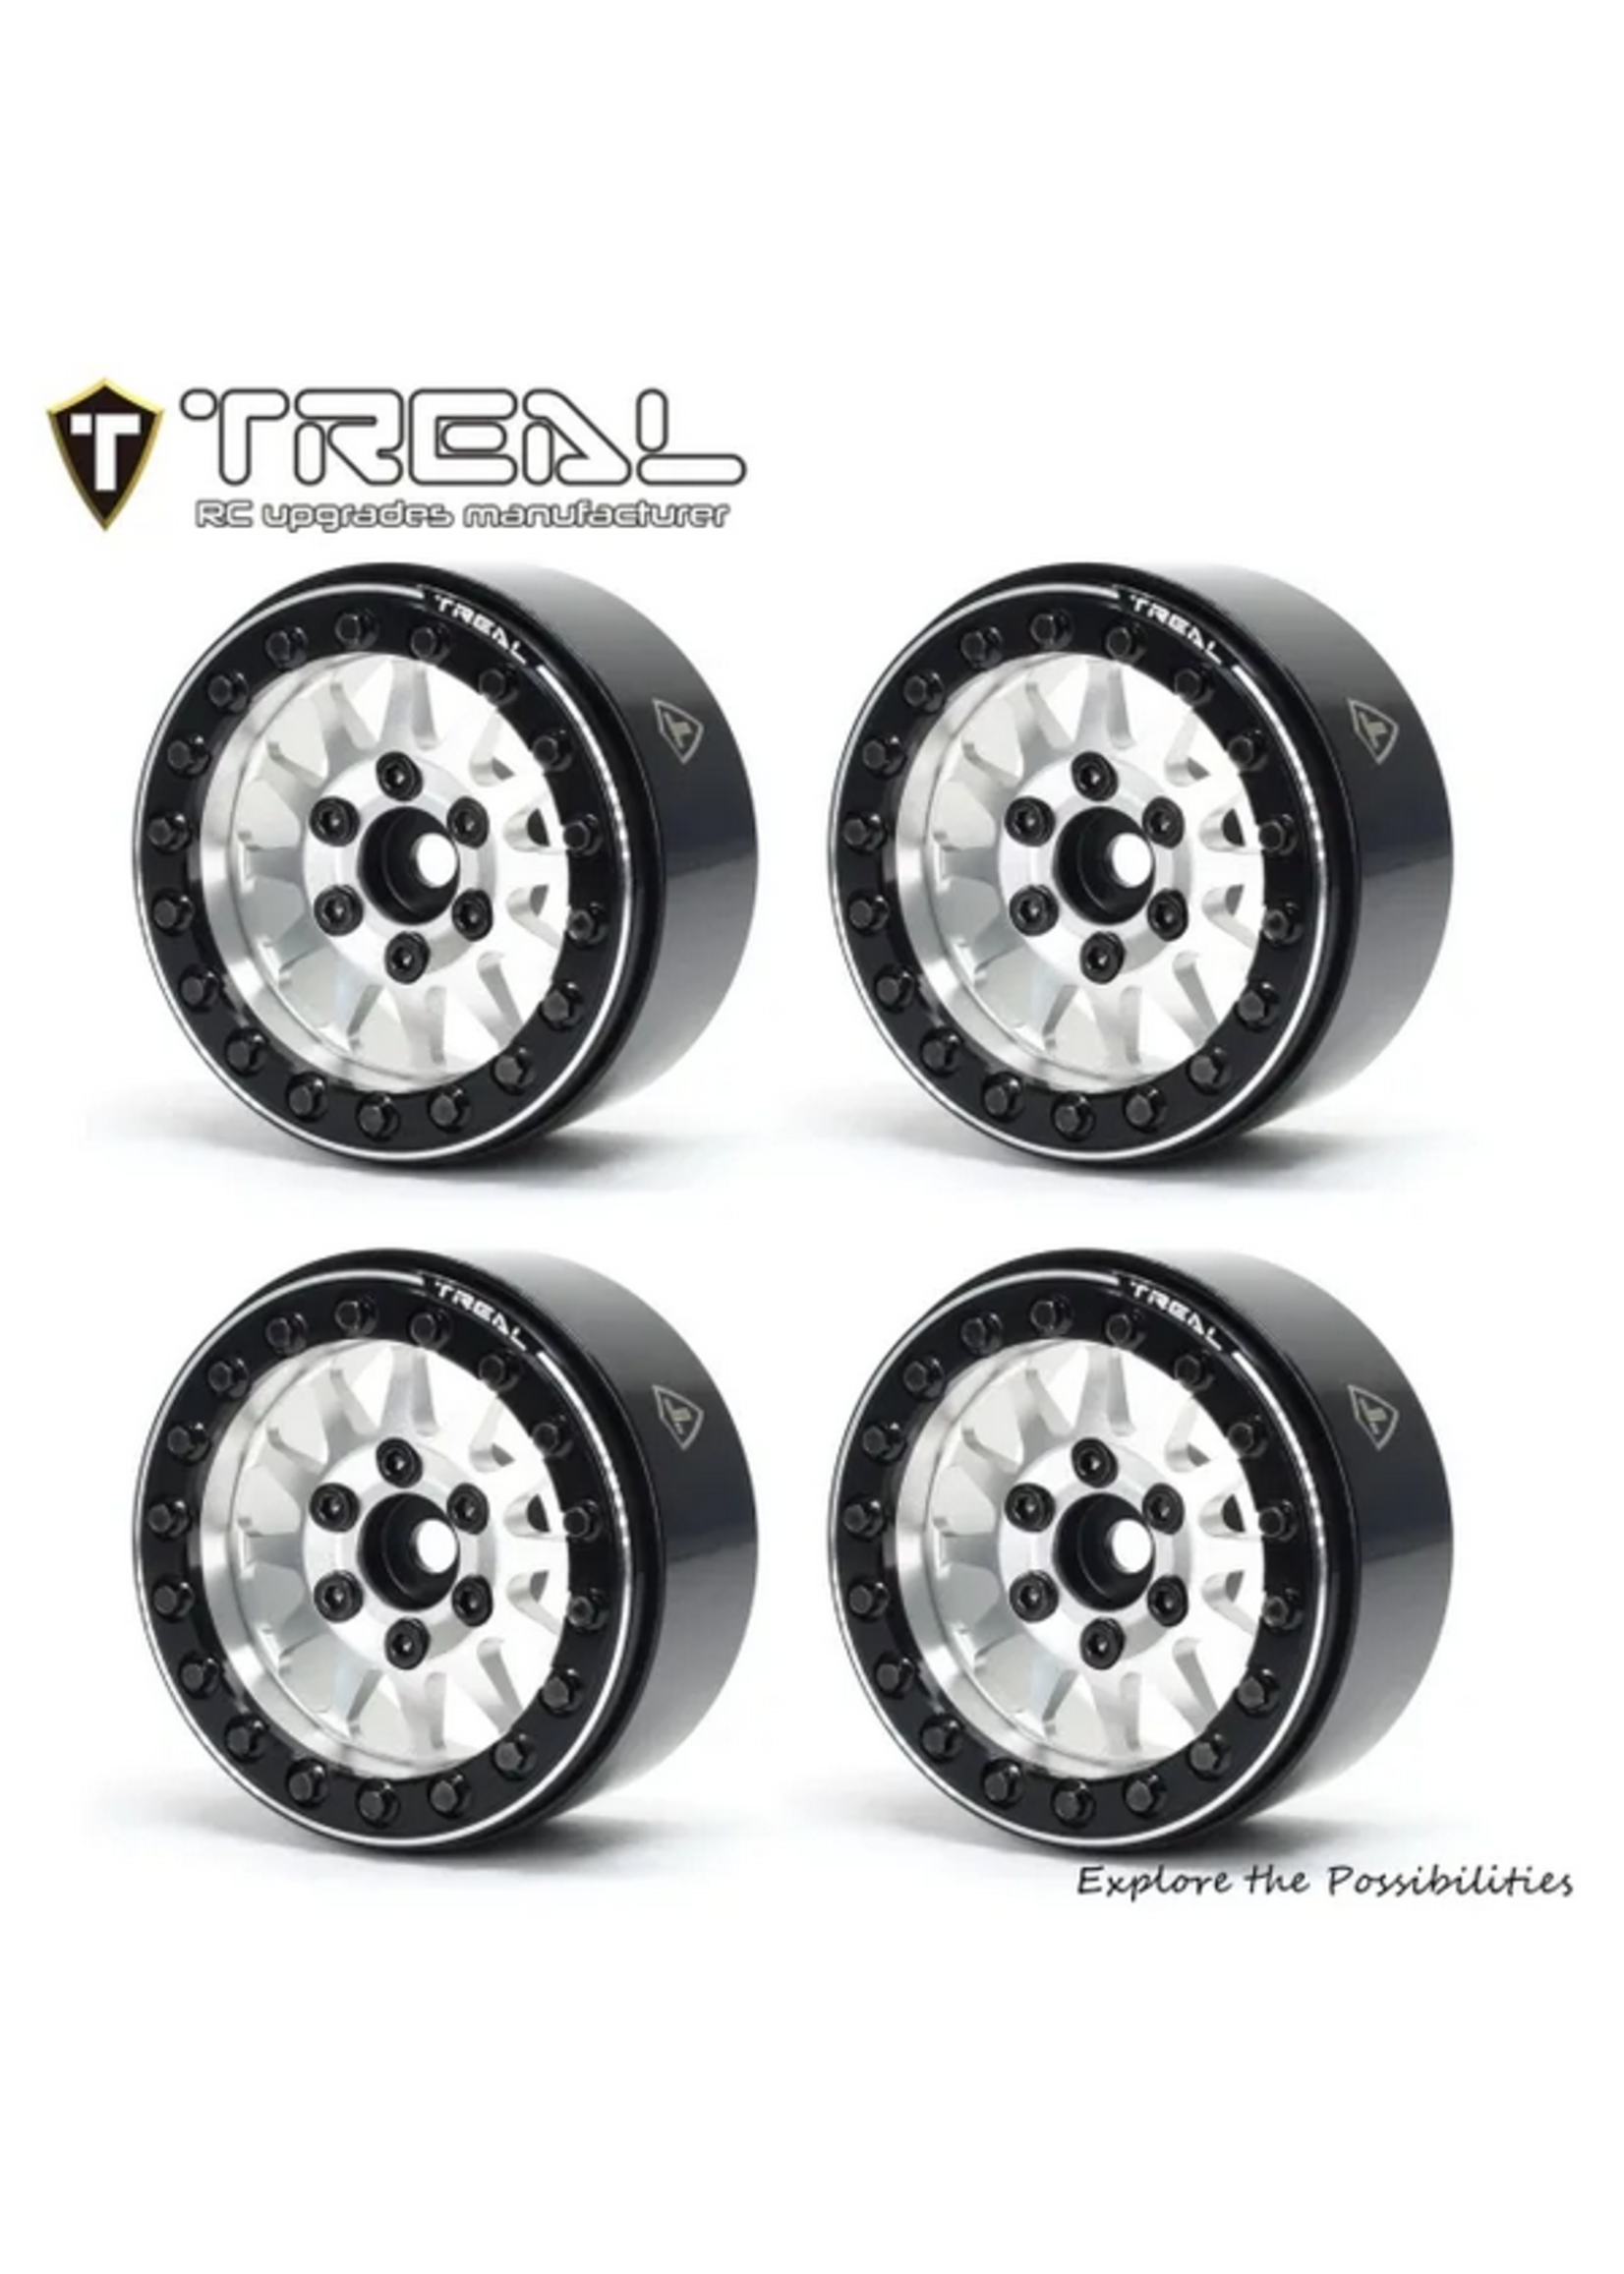 Treal Treal 1.9 Beadlock wheels (4P-Set) Alloy Crawler Wheels for 1:10 RC Scale Truck -Type D Silver/Black